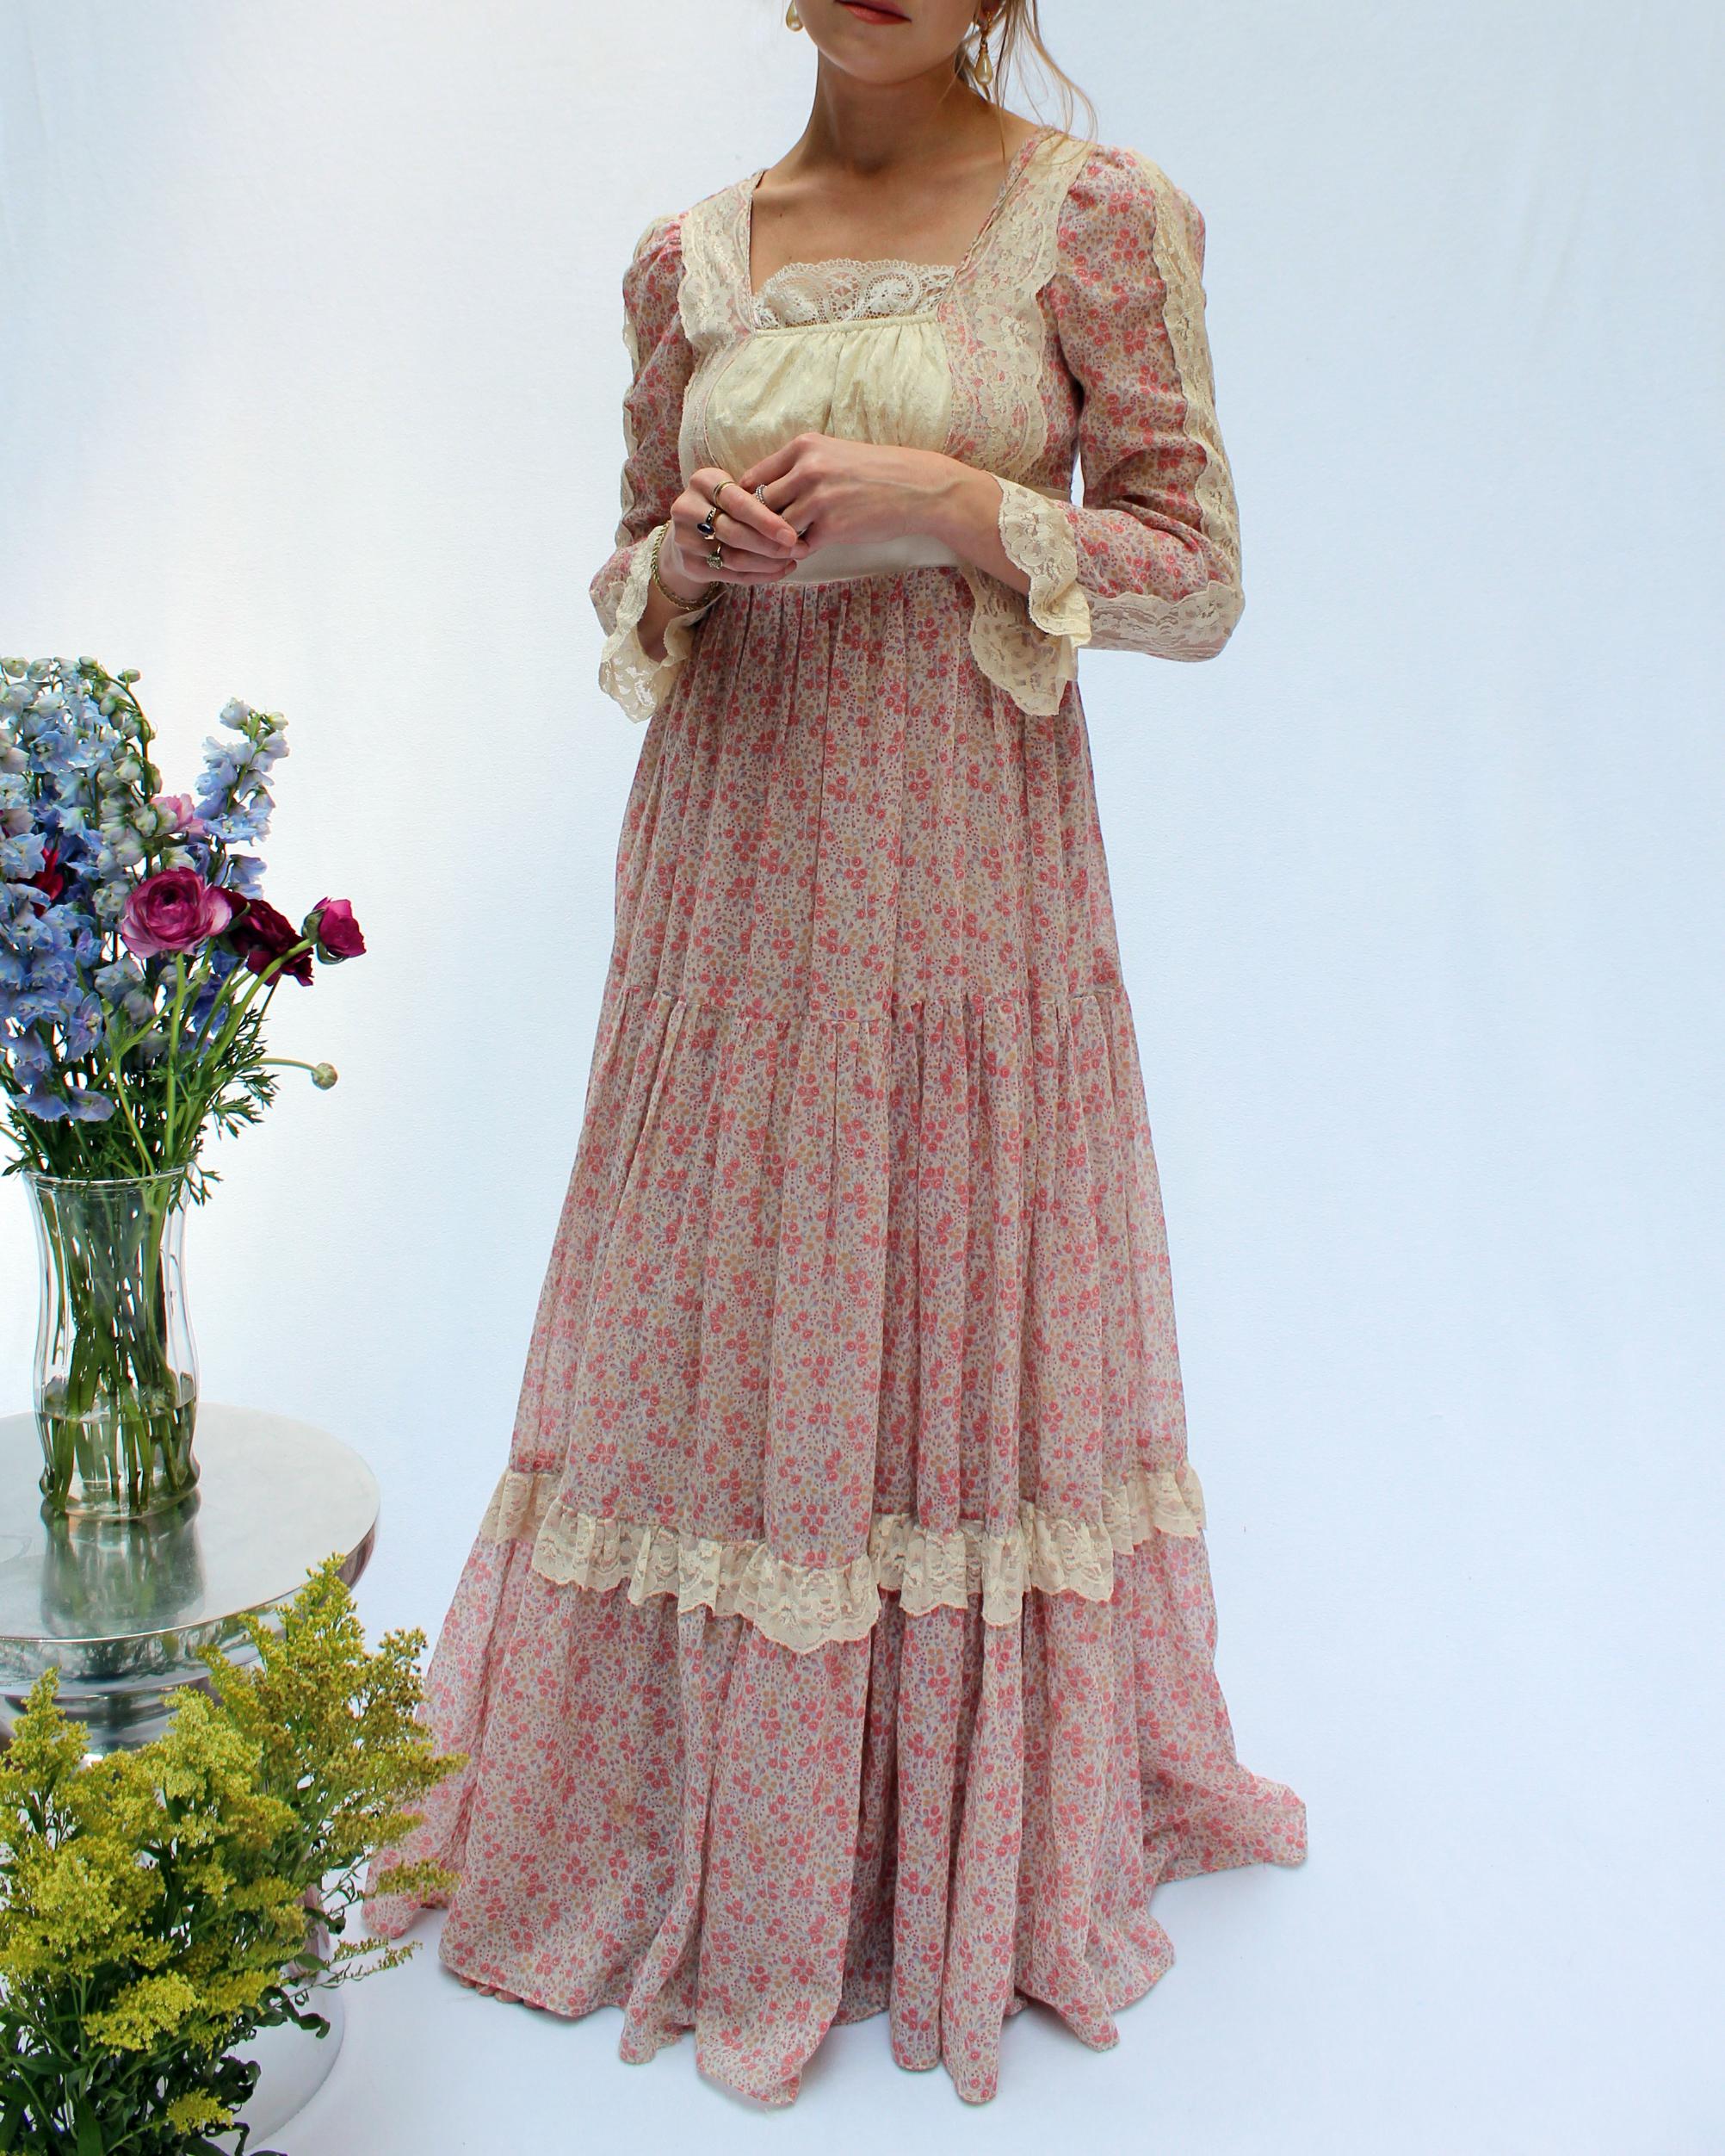 This vintage 1970s Gunne Sax dress is a romantic dream. In the 1970s, Gunne Sax borrowed heavily from Victorian silhouettes, igniting an entire aesthetic that went on to define the style of an era. This dress is a beautiful example: its crafted from